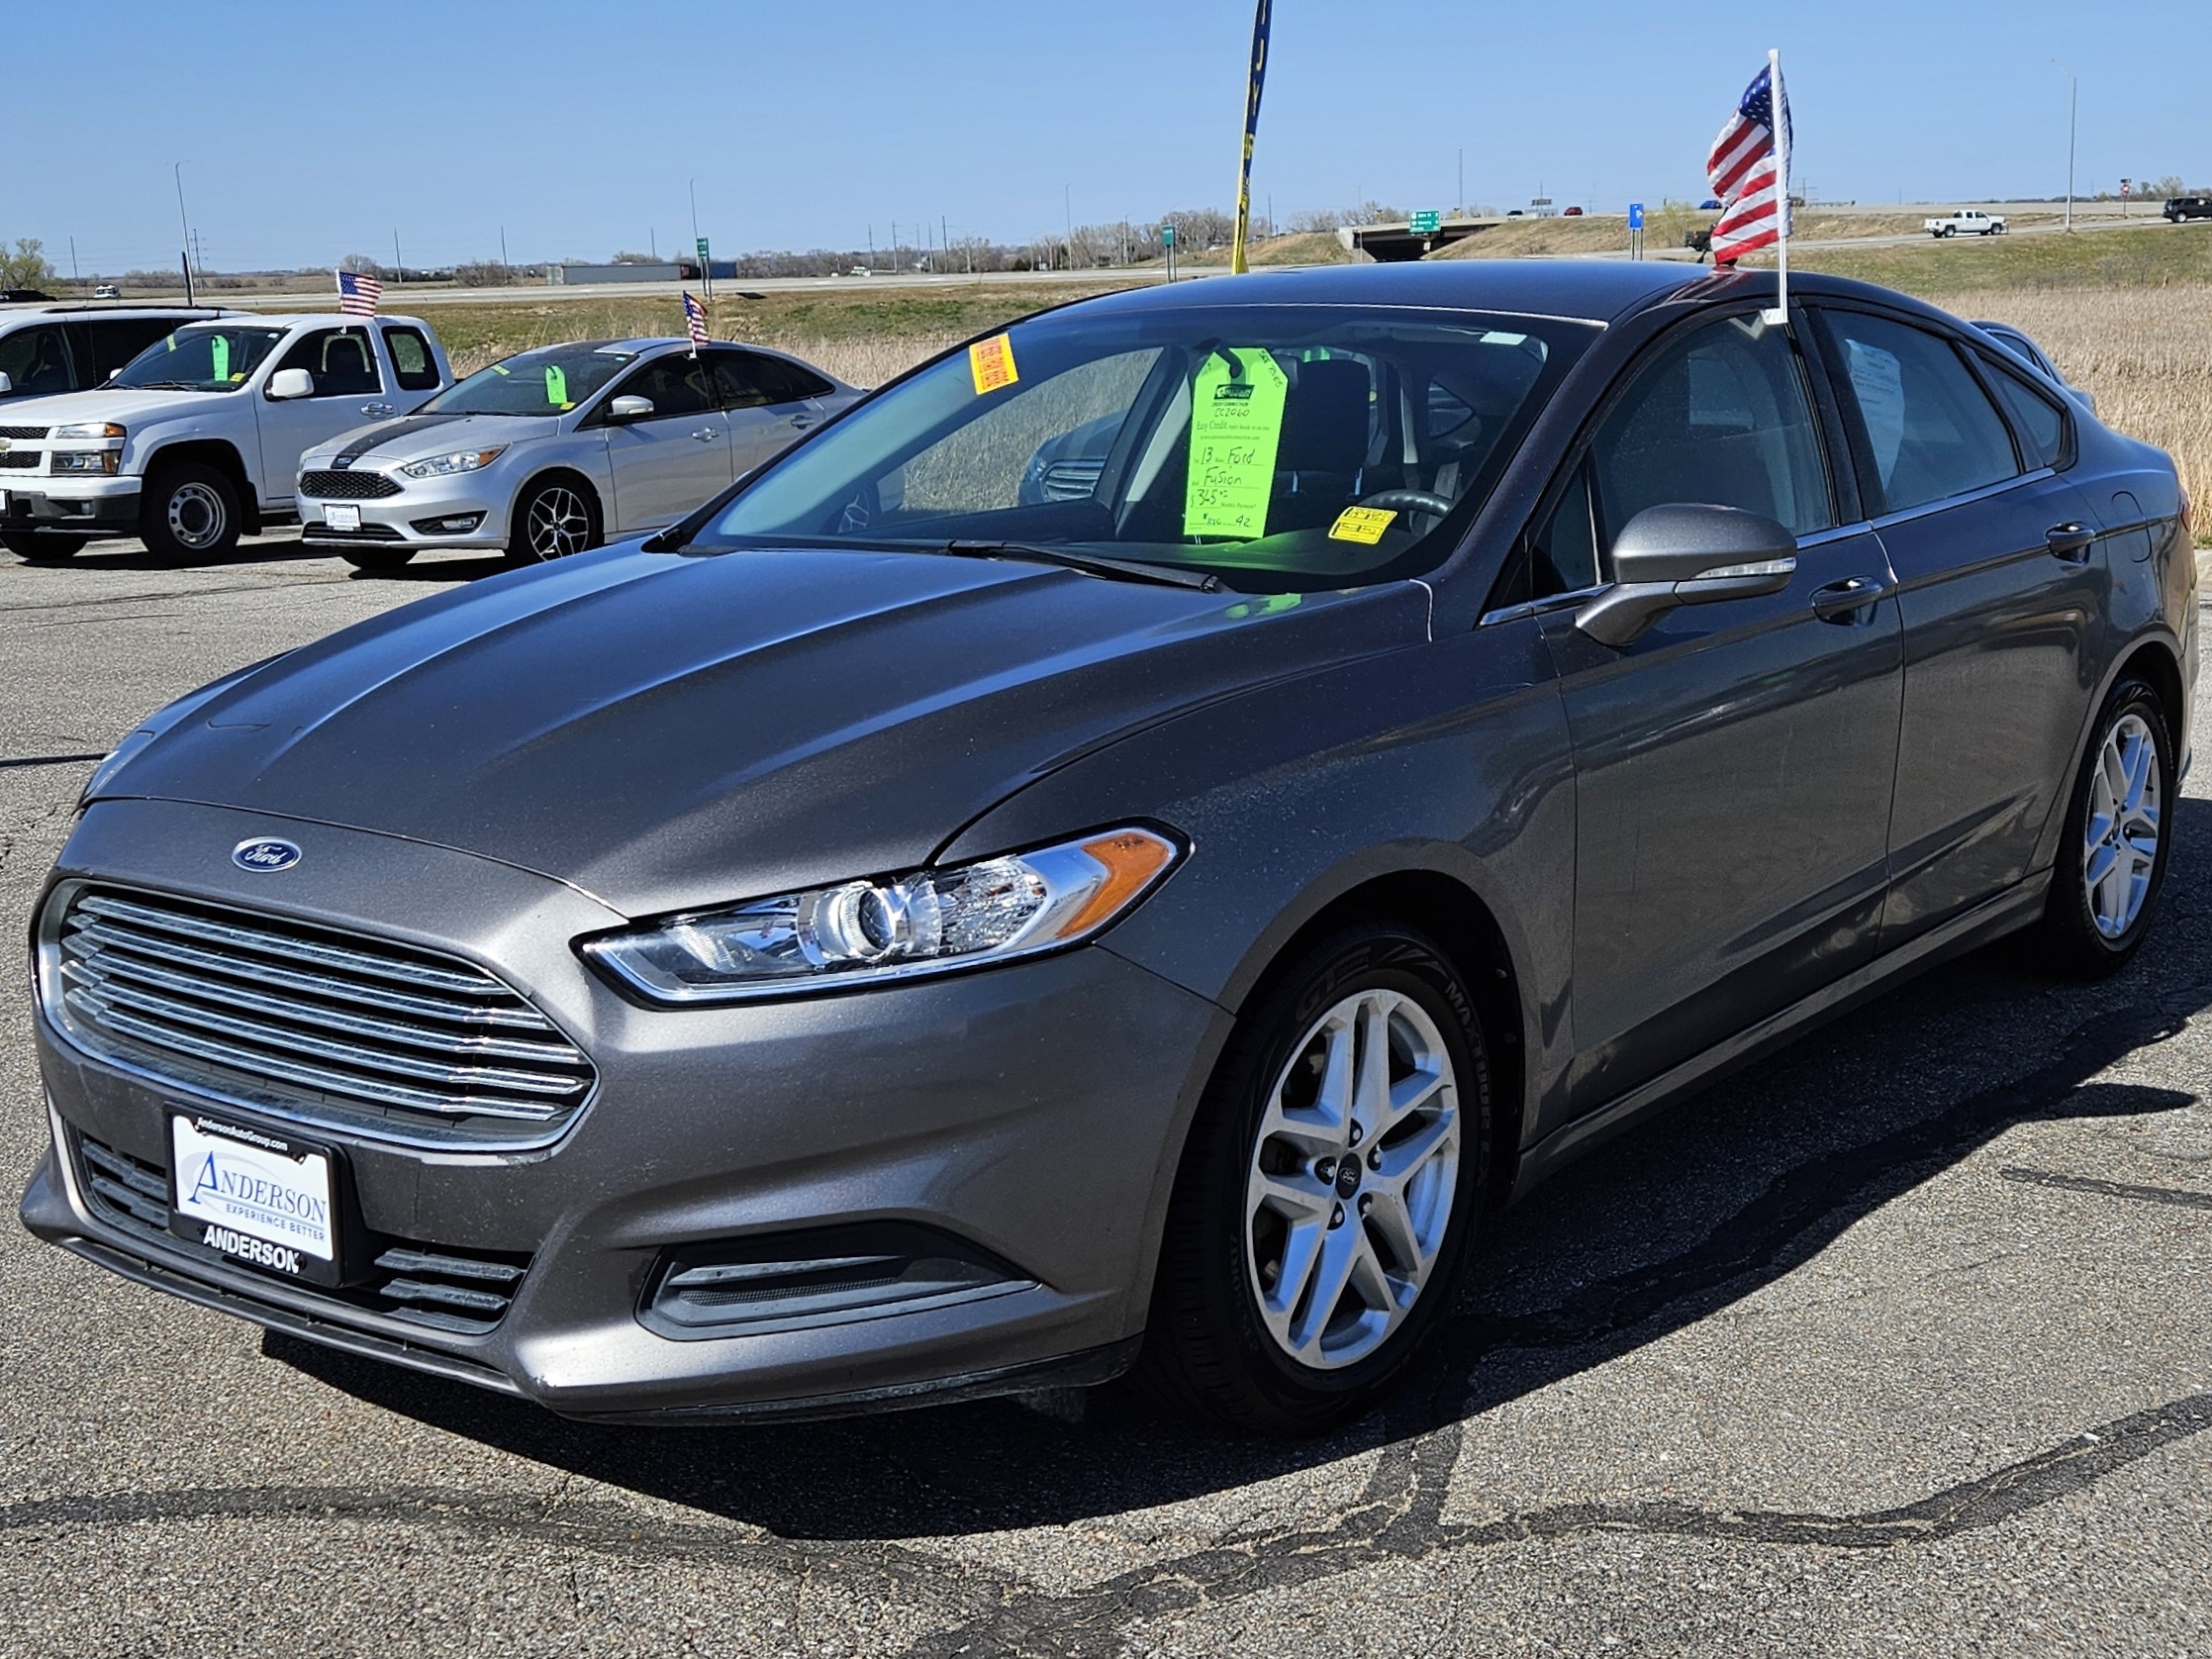 Used 2013 Ford Fusion SE Sedan for sale in 